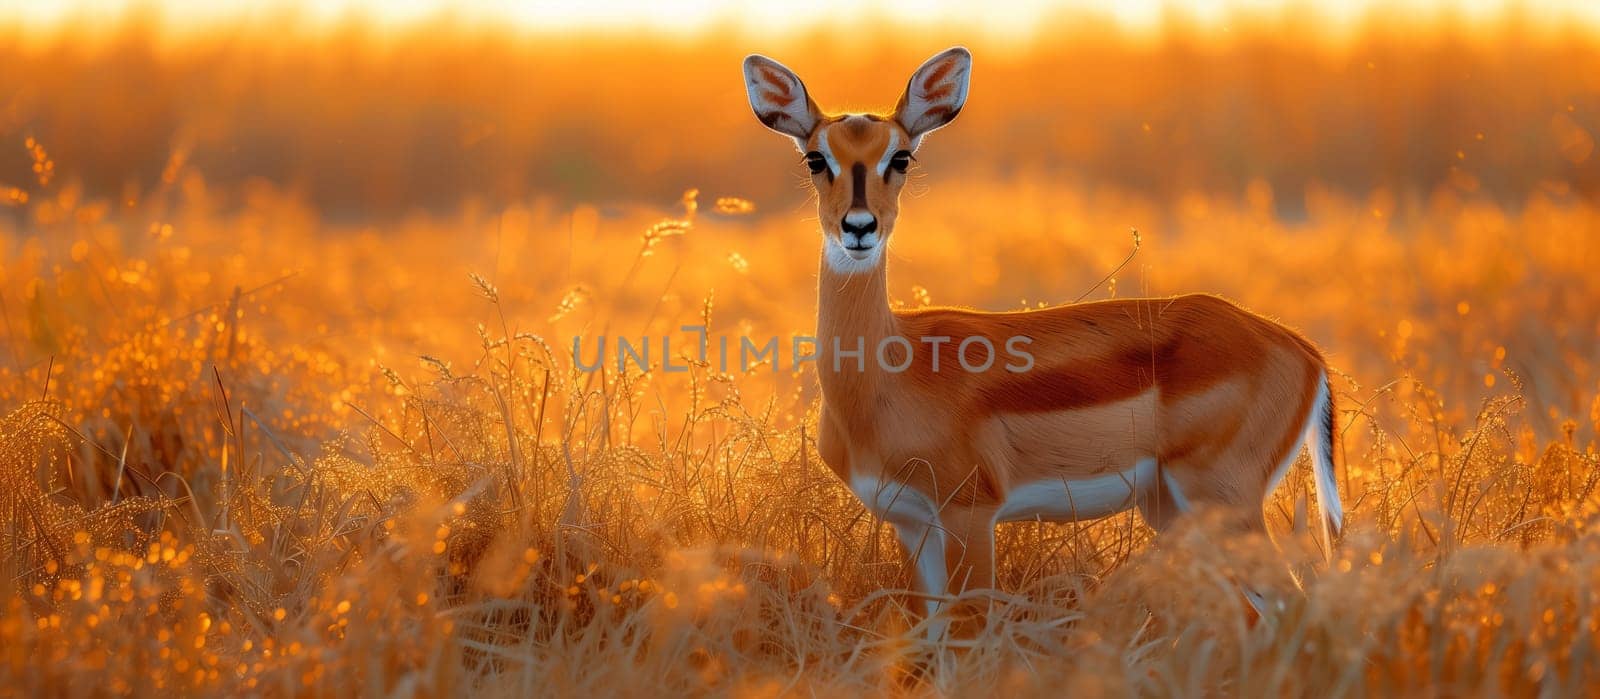 Deer in grassy Ecoregion at sunset, Fawn exploring the Natural landscape by richwolf